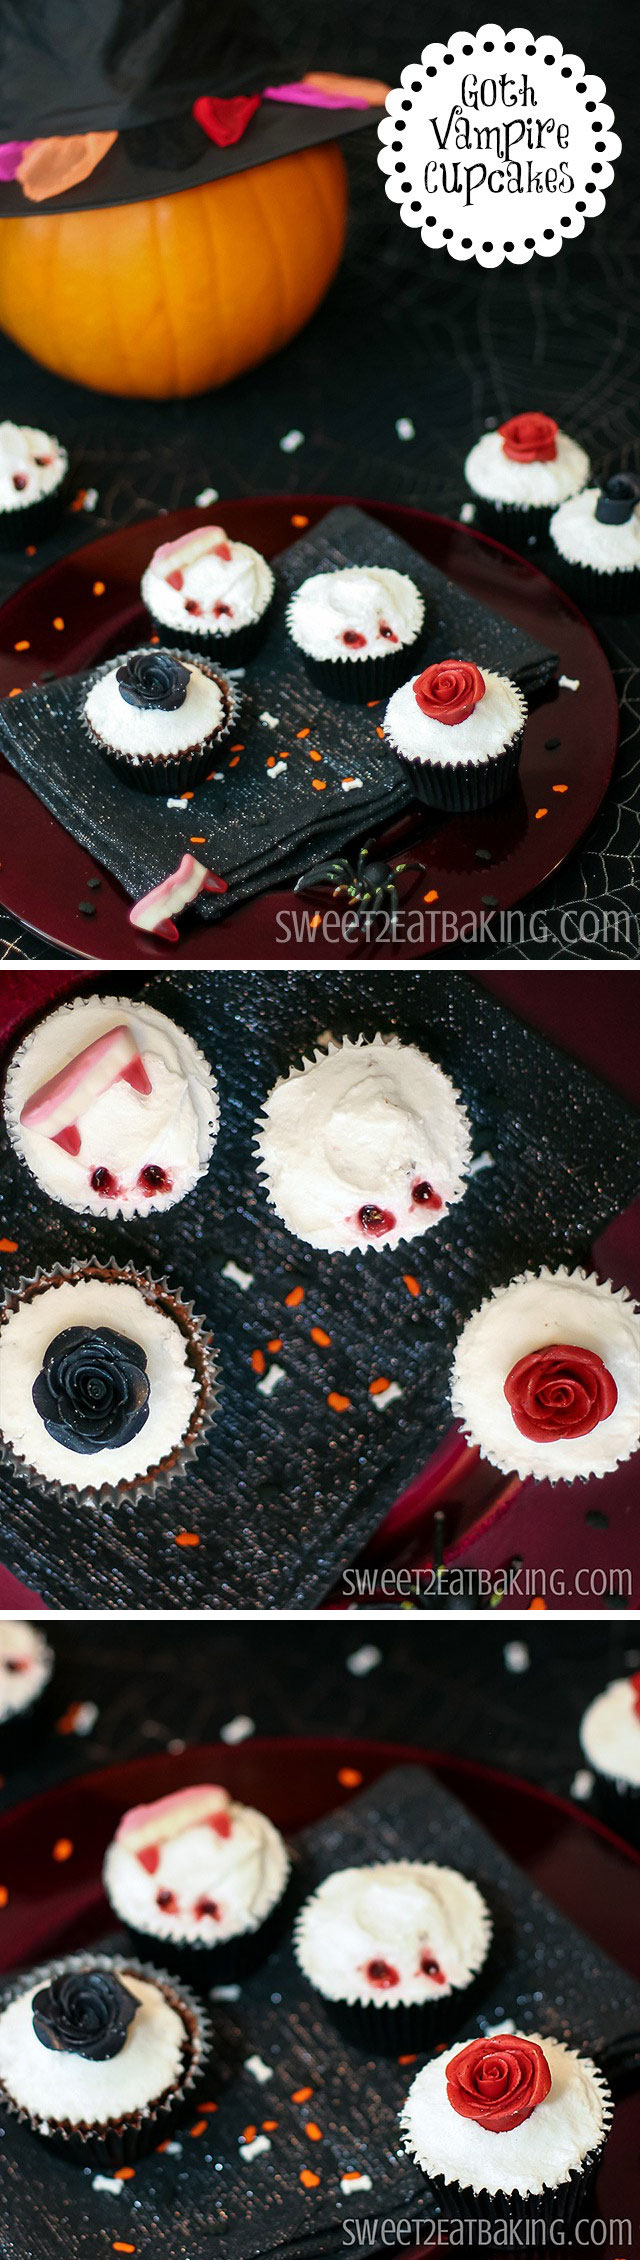 Gothic Roses and Vampire Bite Halloween Cupcakes Recipe by Sweet2EatBaking.com | Get back to goth with these Halloween themed moist Devil’s cardamom chocolate cupcakes. Black and blood red roses, and bloody vampire bites make these the perfect dessert for Halloween party.